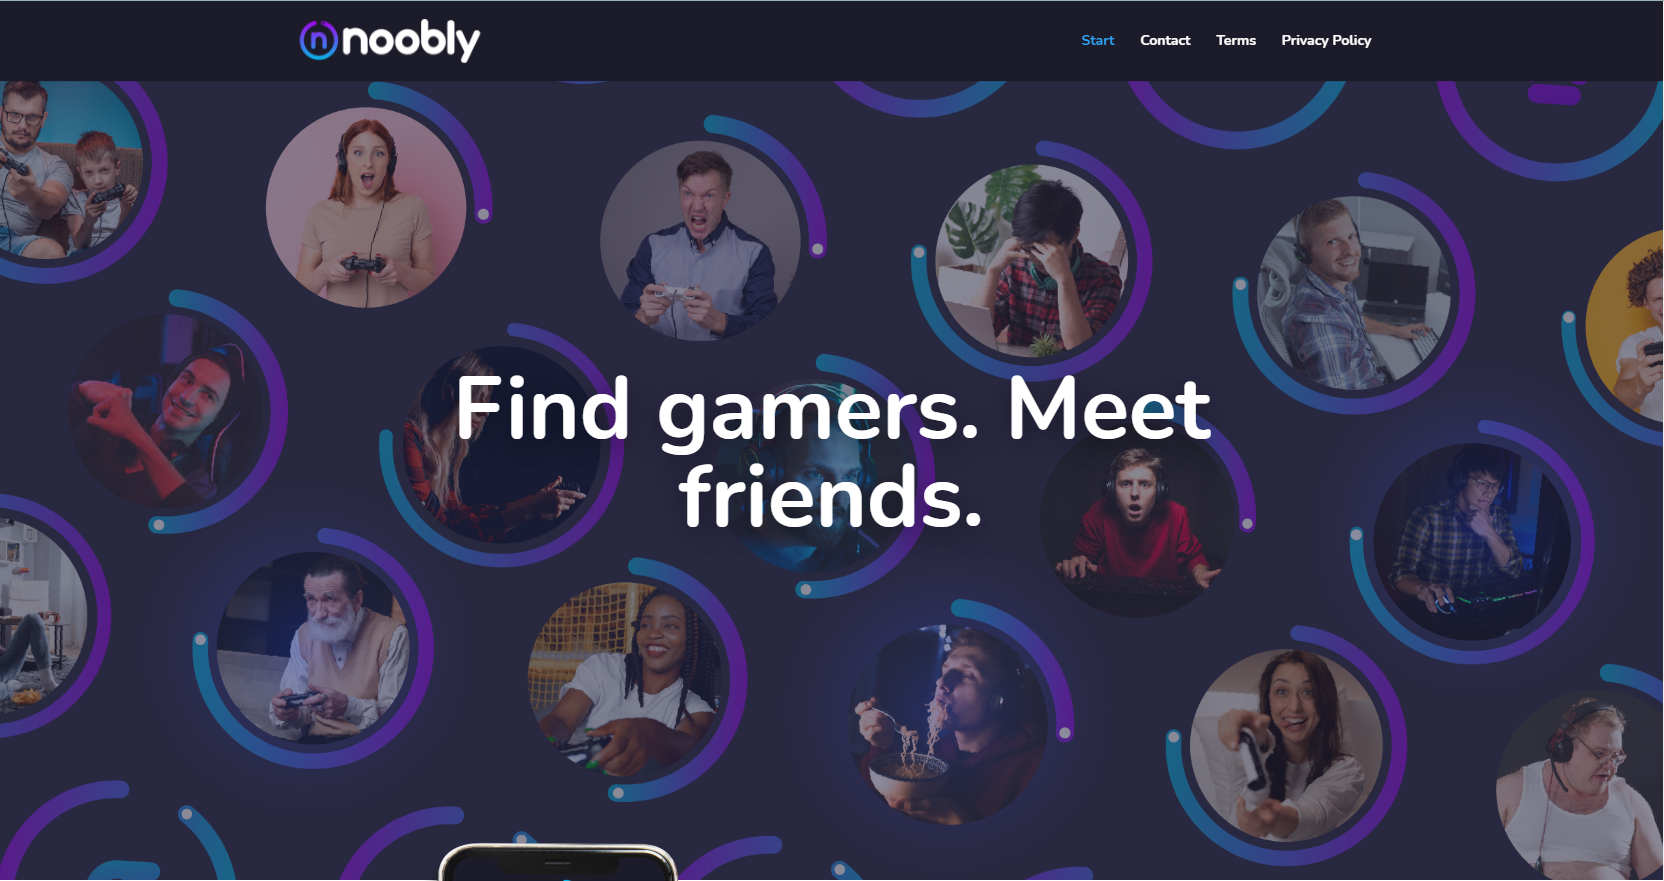 Site for gamers to meet friends and play together